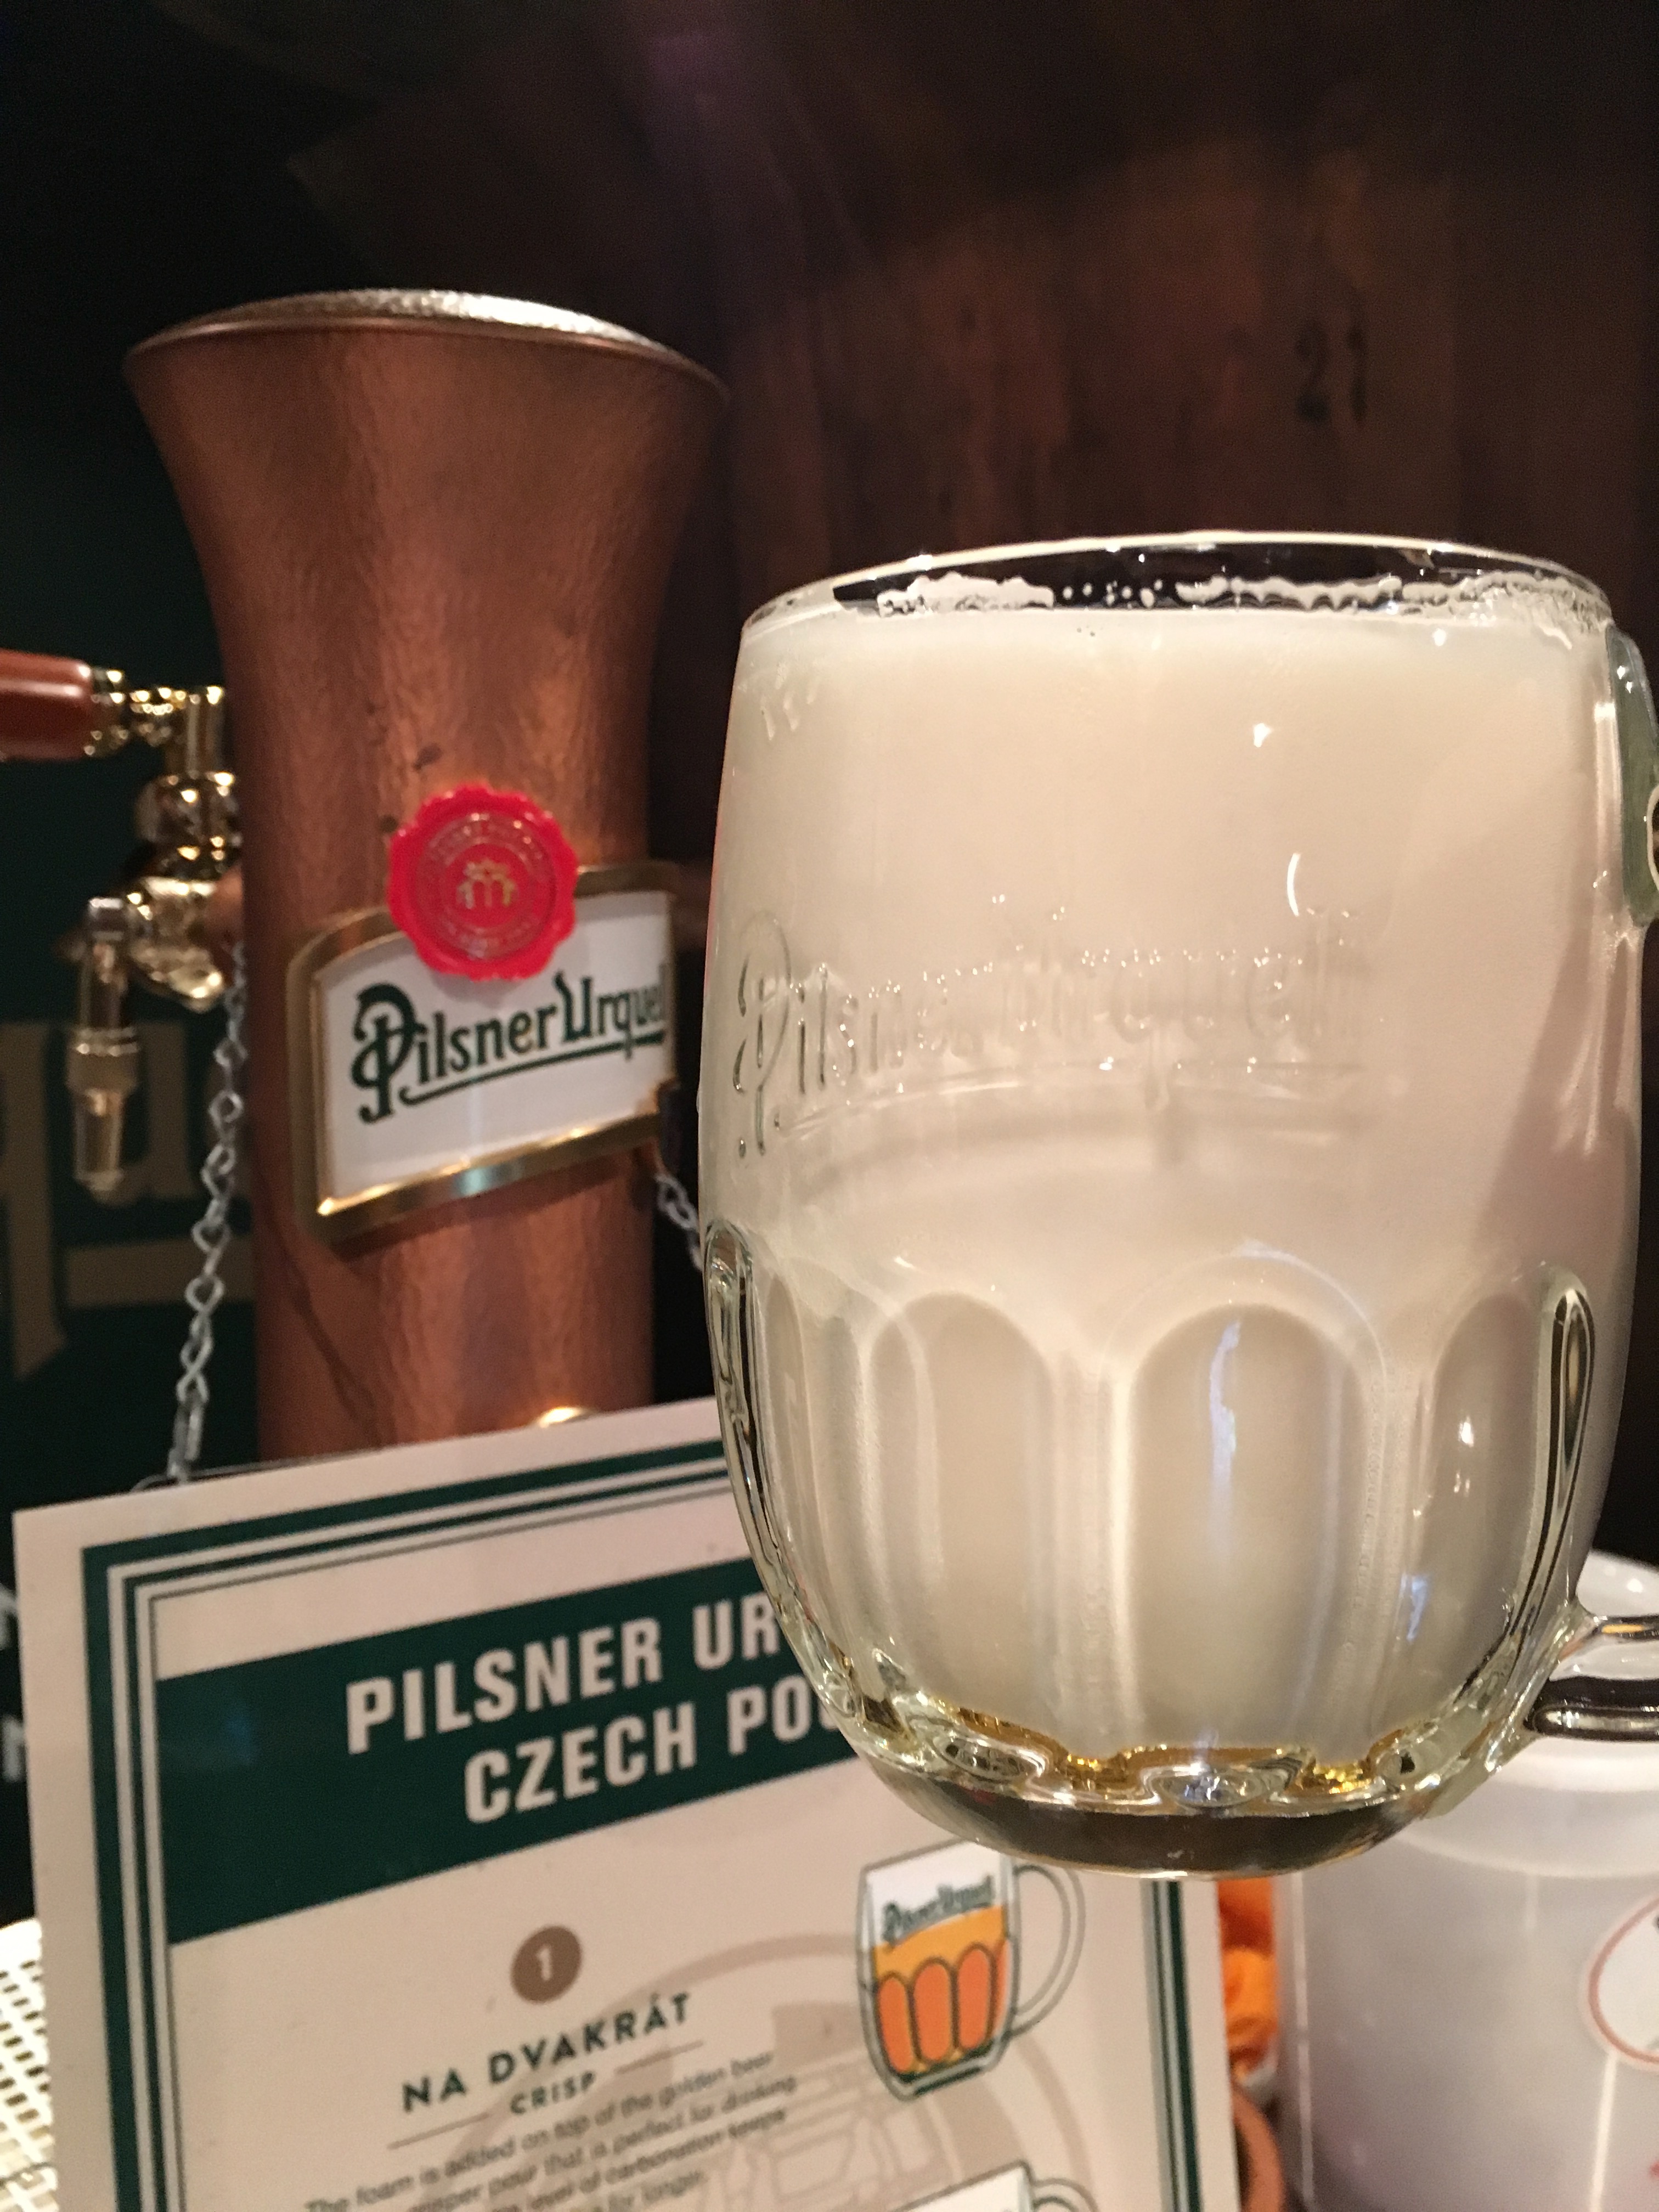 A fresh pour of Pilsner Urquell Mliko (Milk/Sweet) from its special faucet.